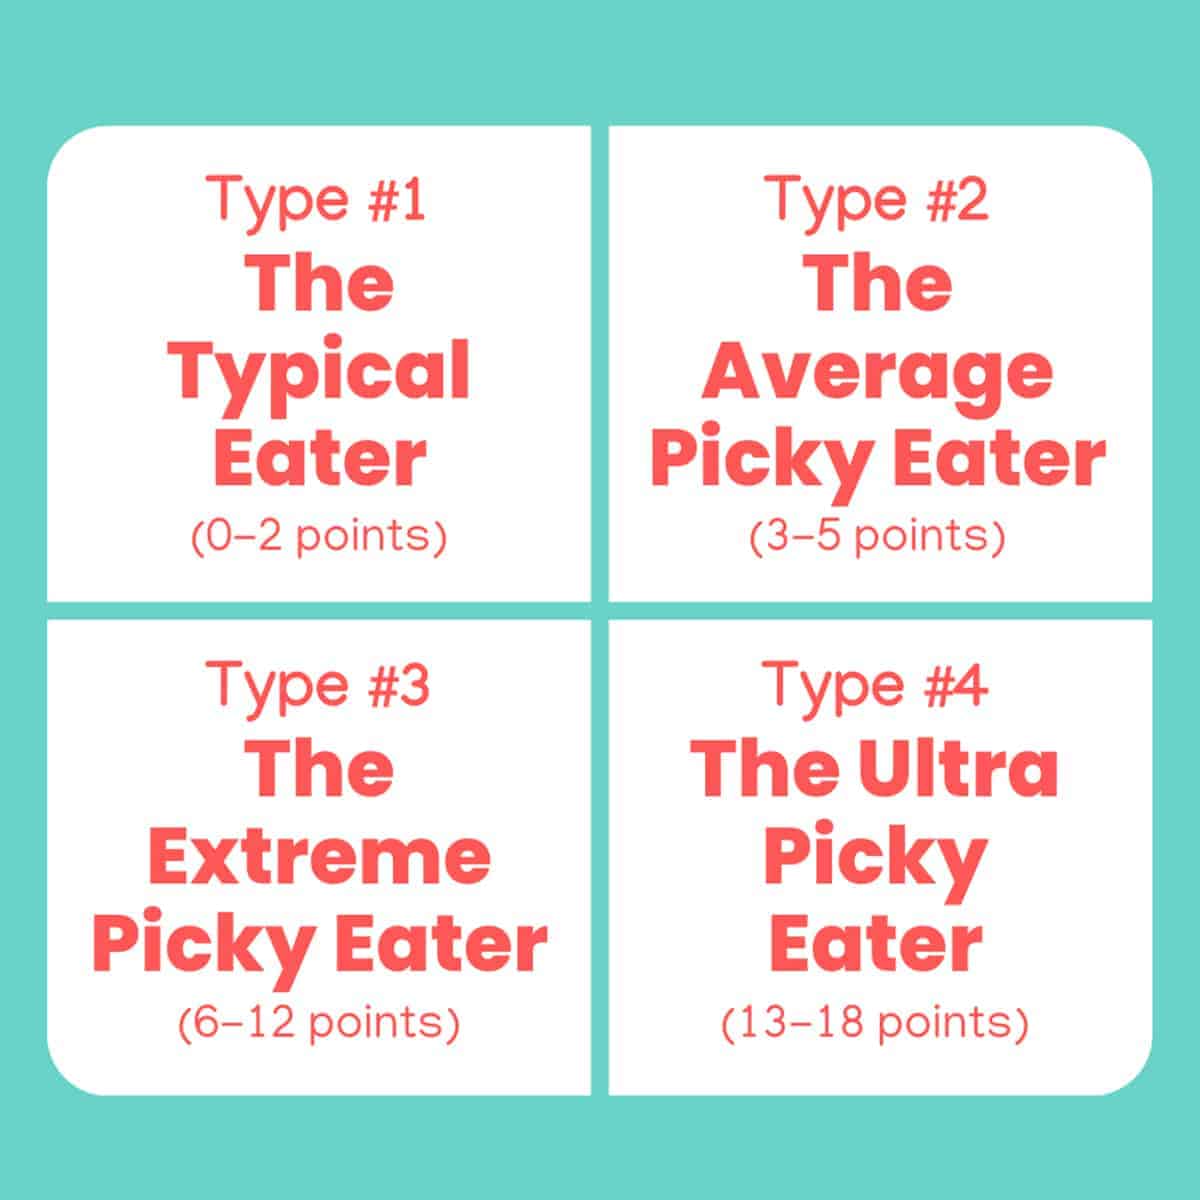 Take the Test: What Type of Picky Eater is Your Child?